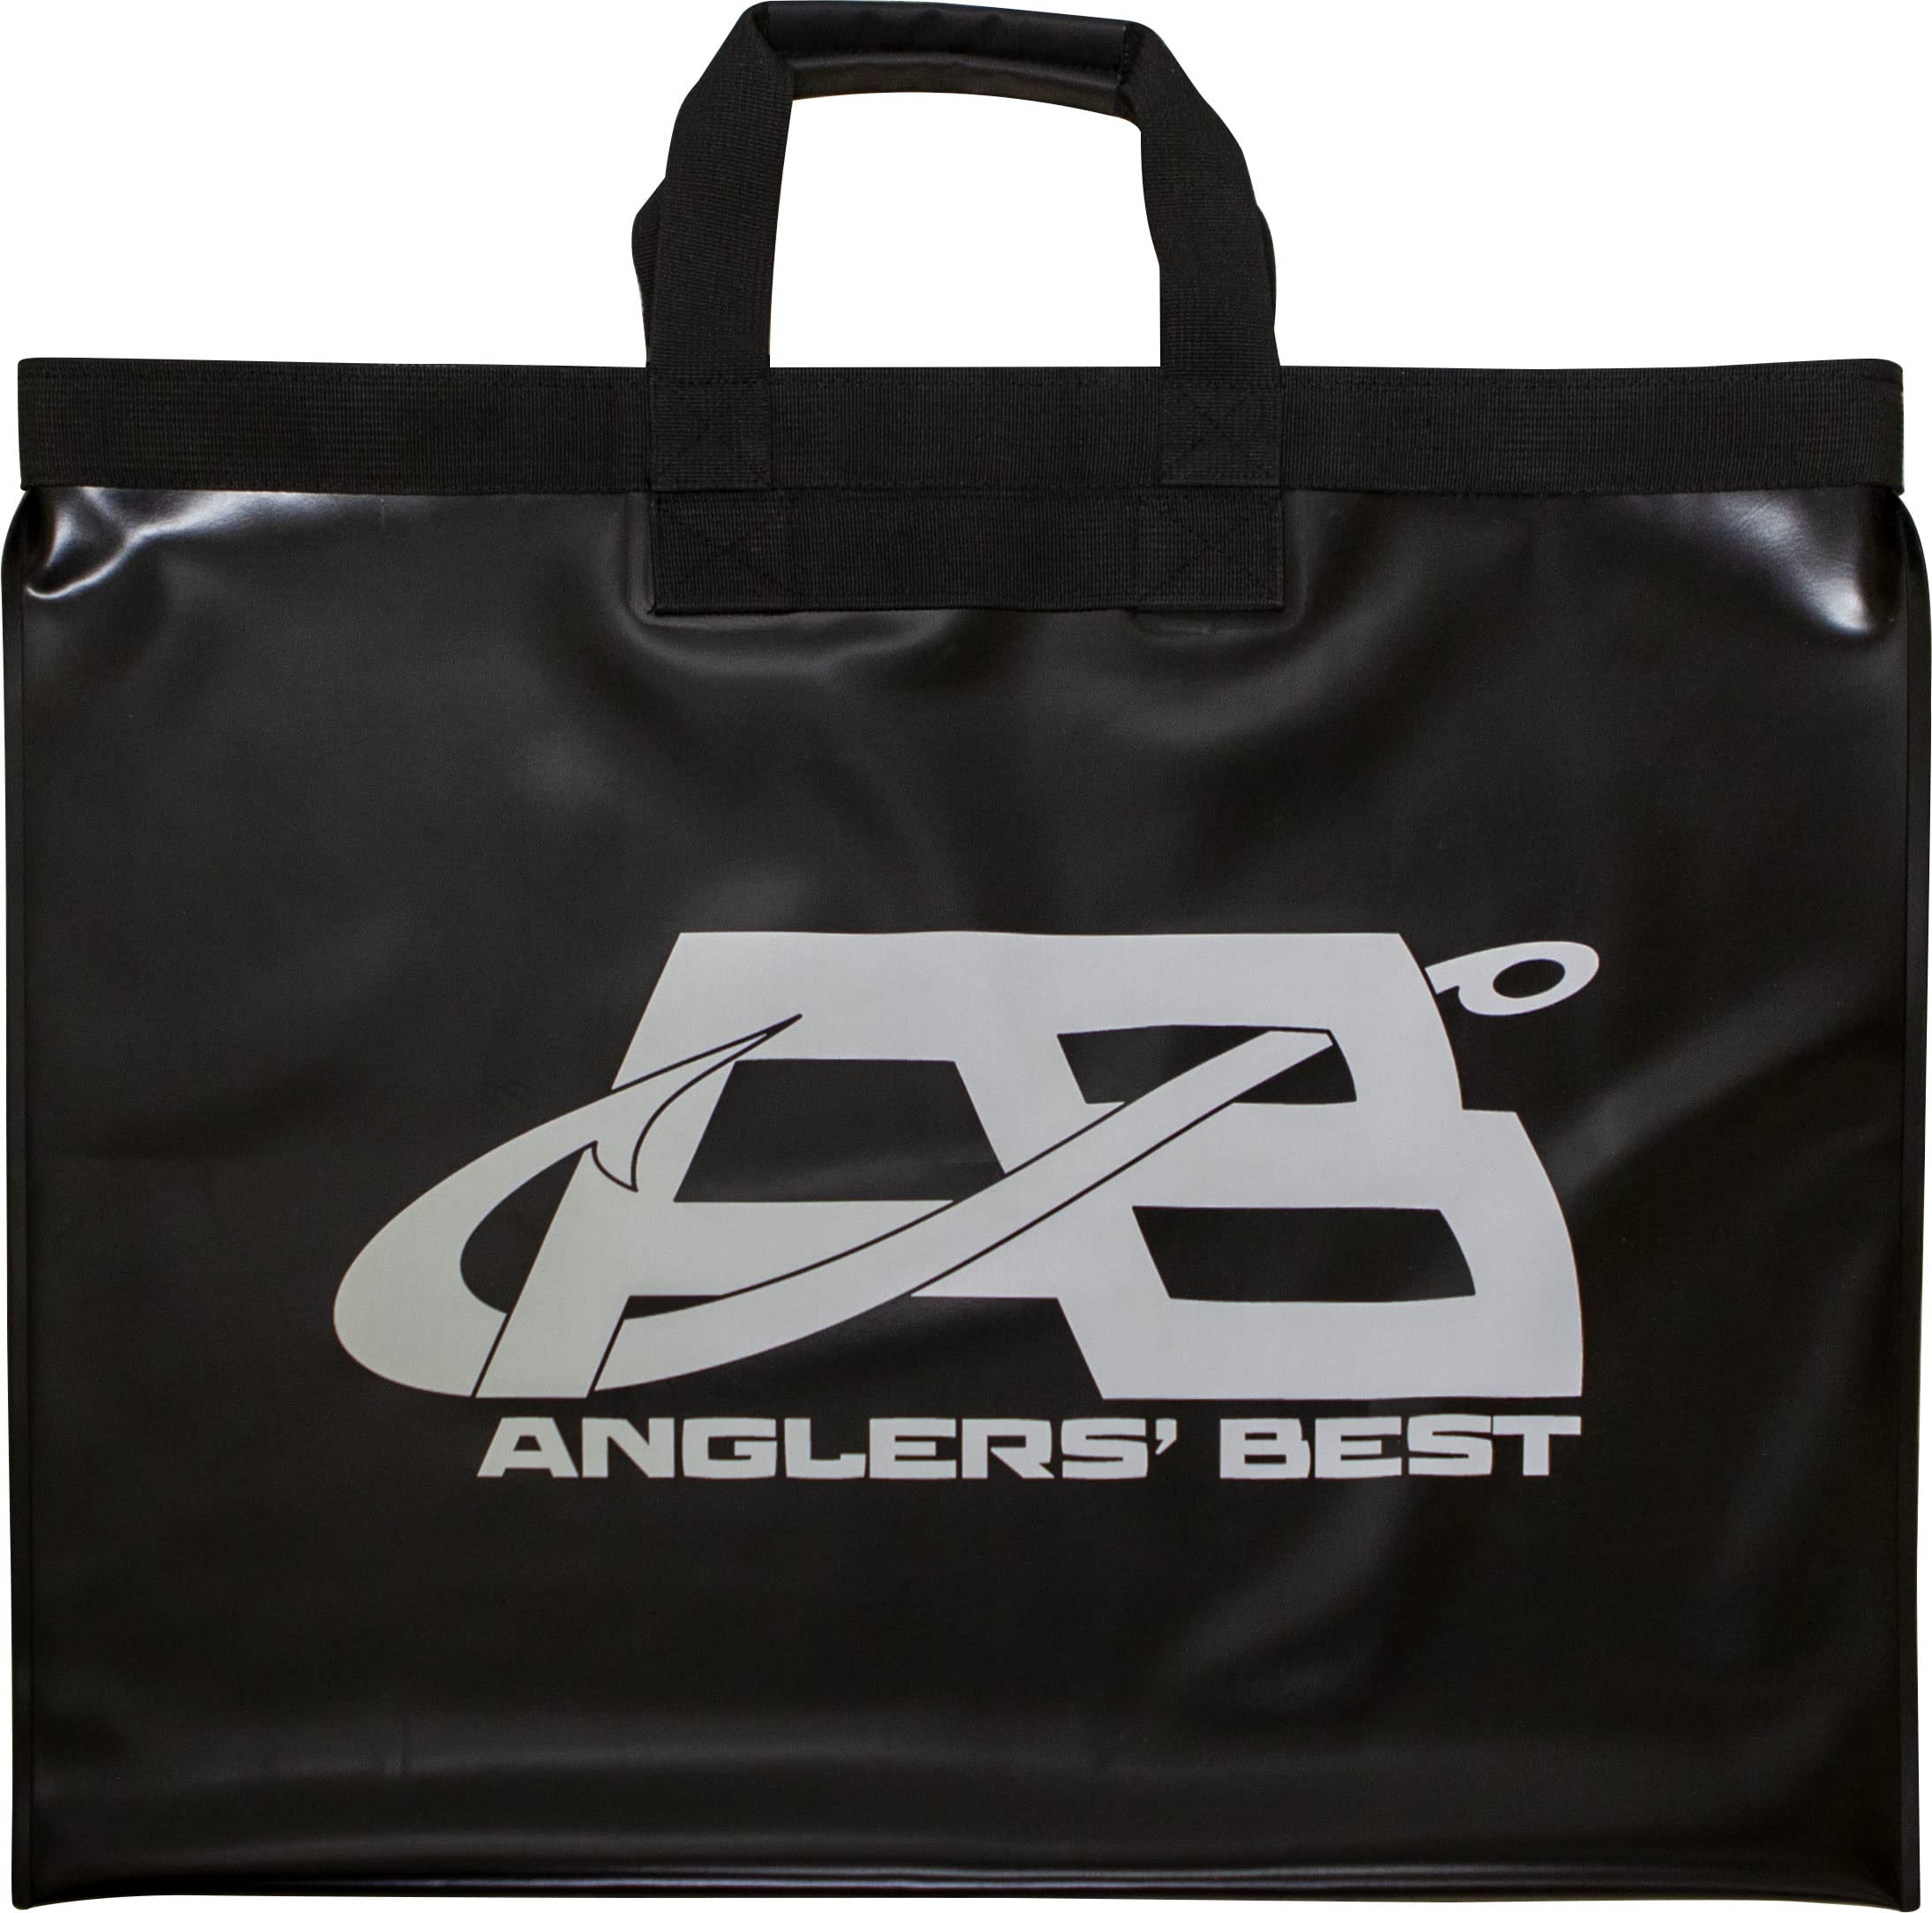 Angler's Best Leak Proof and Puncture Resistant Fishing Tournament Weigh-In  Bag with Ruler, 24x20